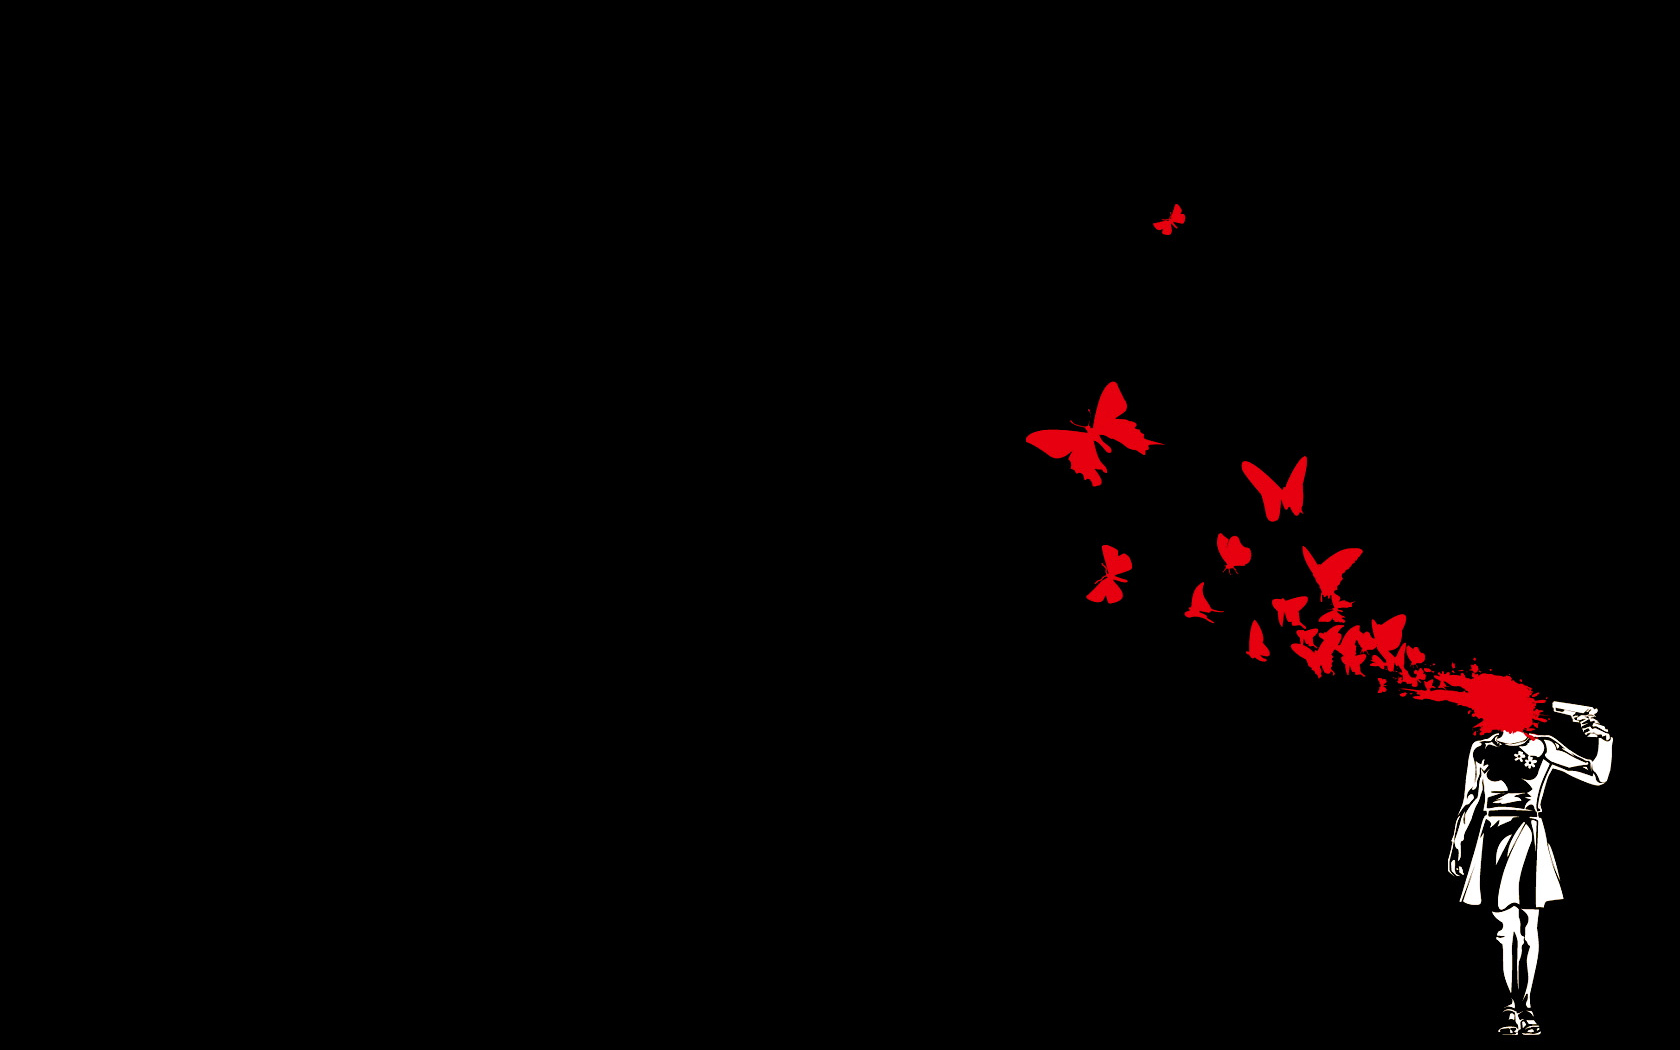 Black Red Wallpaper 1680x1050 Black Red Butterfly Suicide 1680x1050